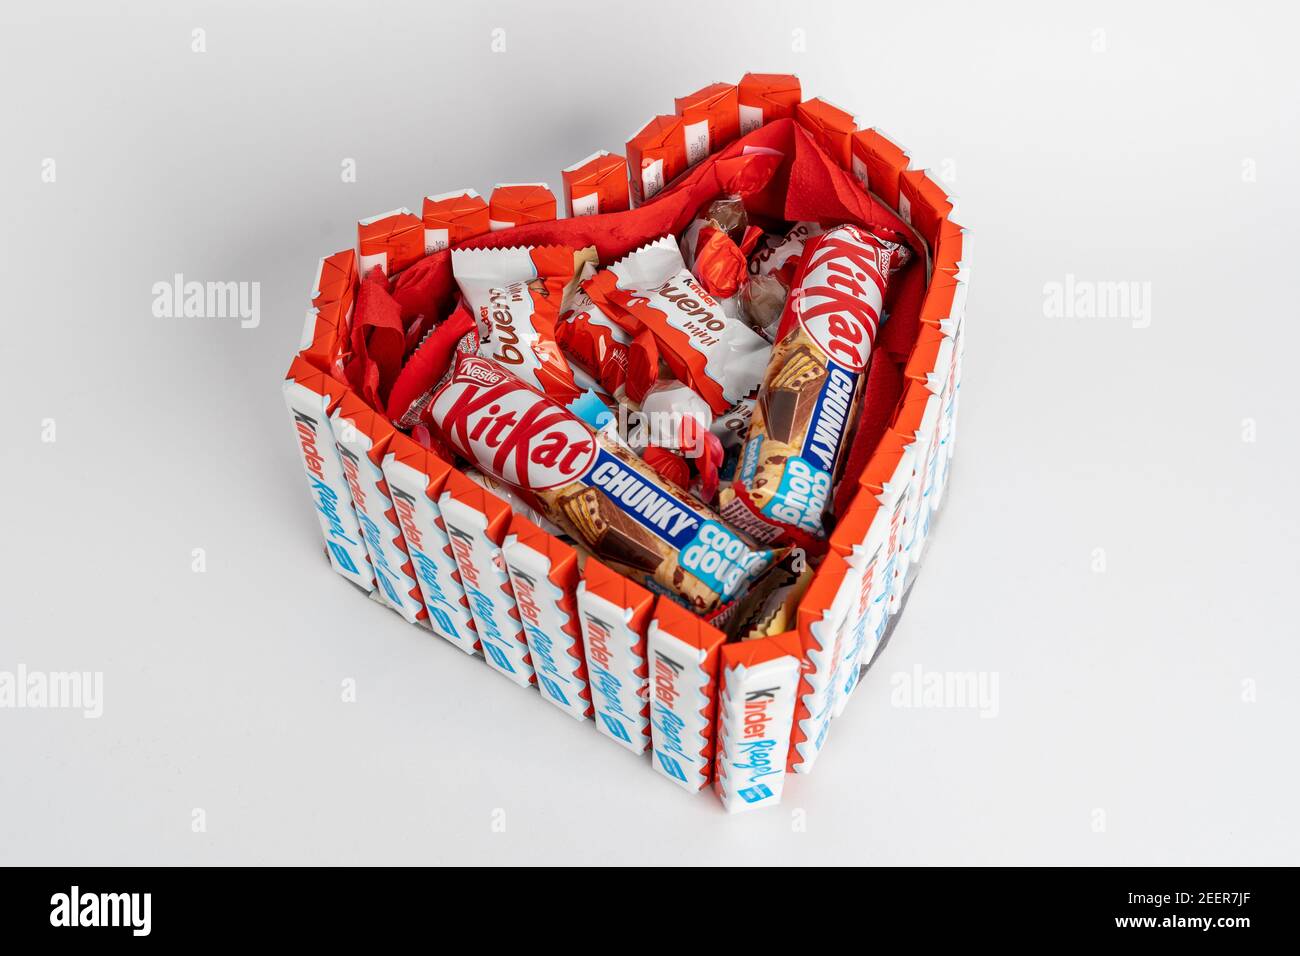 Valentine's Day present made of sweets and candies in a shape of a heart as a proof of love. Stock Photo